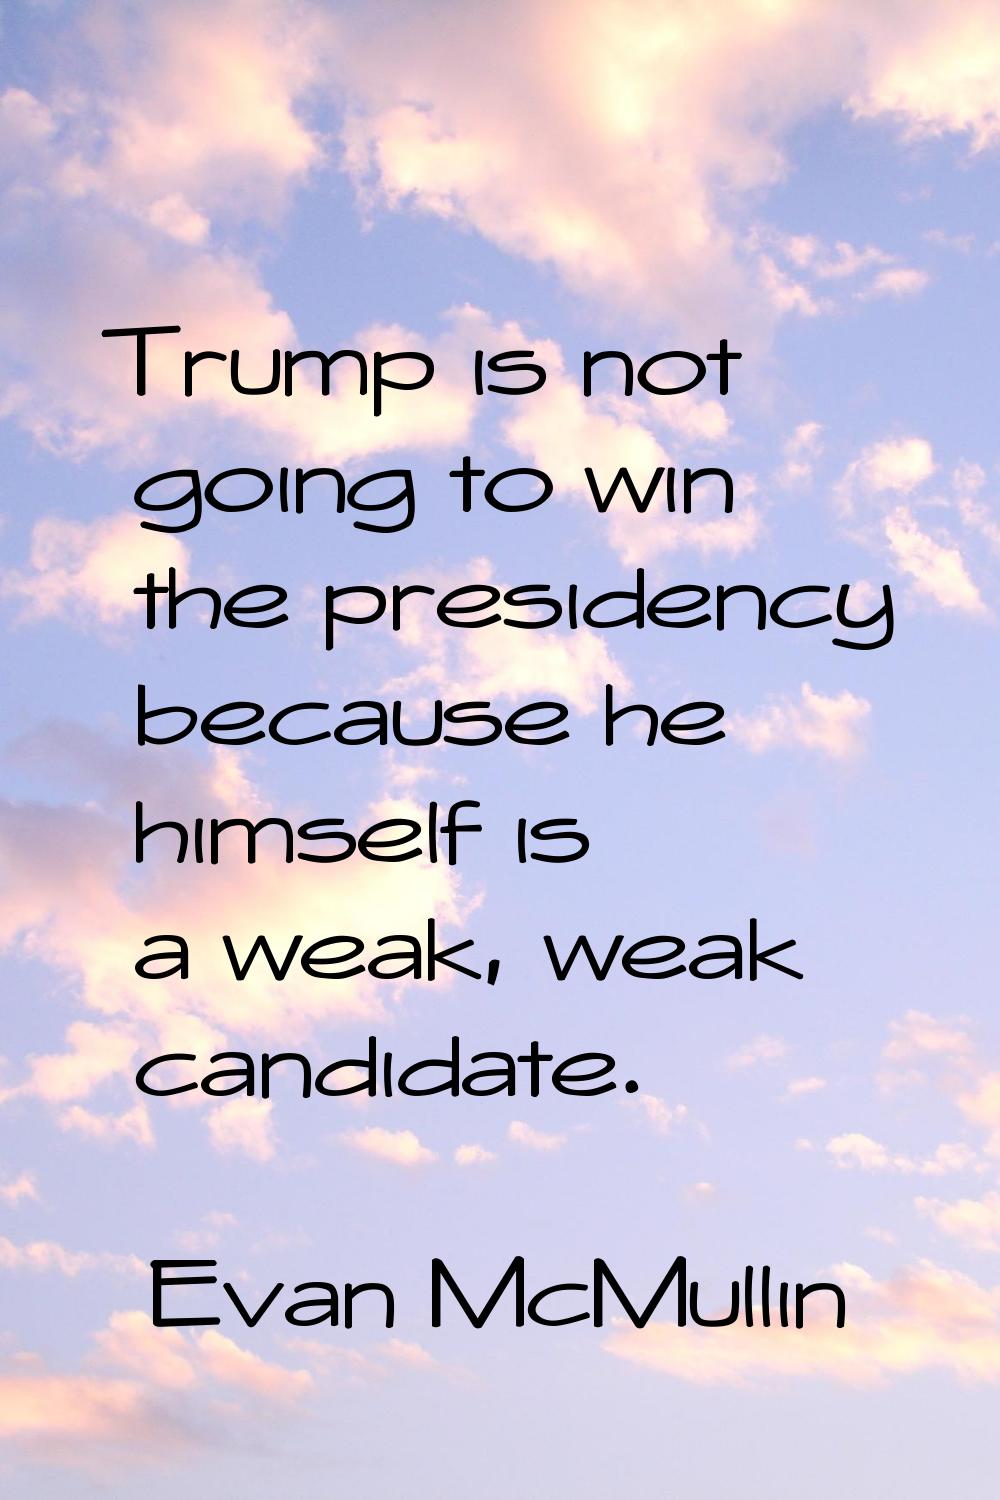 Trump is not going to win the presidency because he himself is a weak, weak candidate.